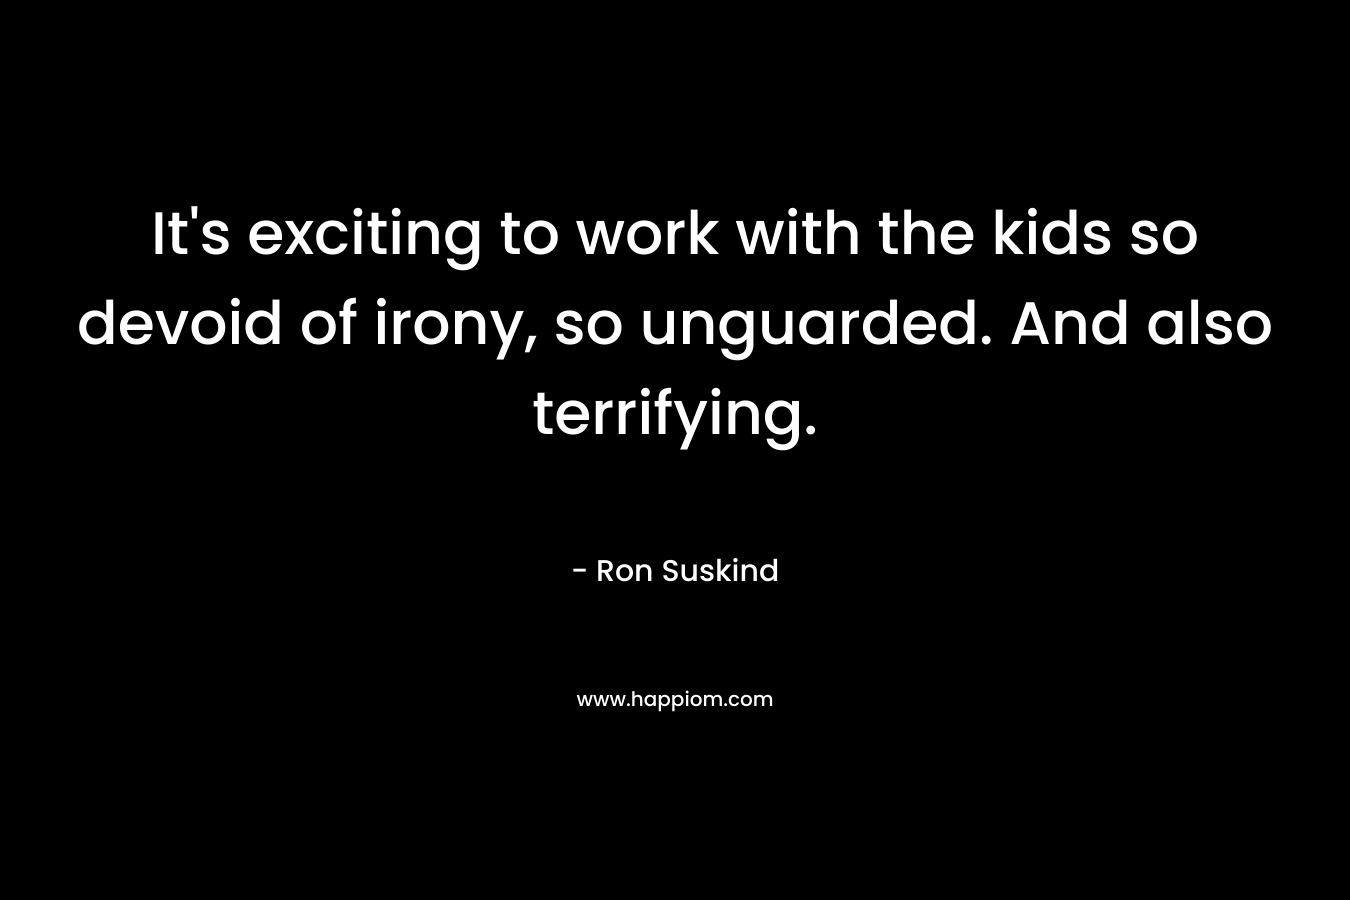 It’s exciting to work with the kids so devoid of irony, so unguarded. And also terrifying. – Ron Suskind